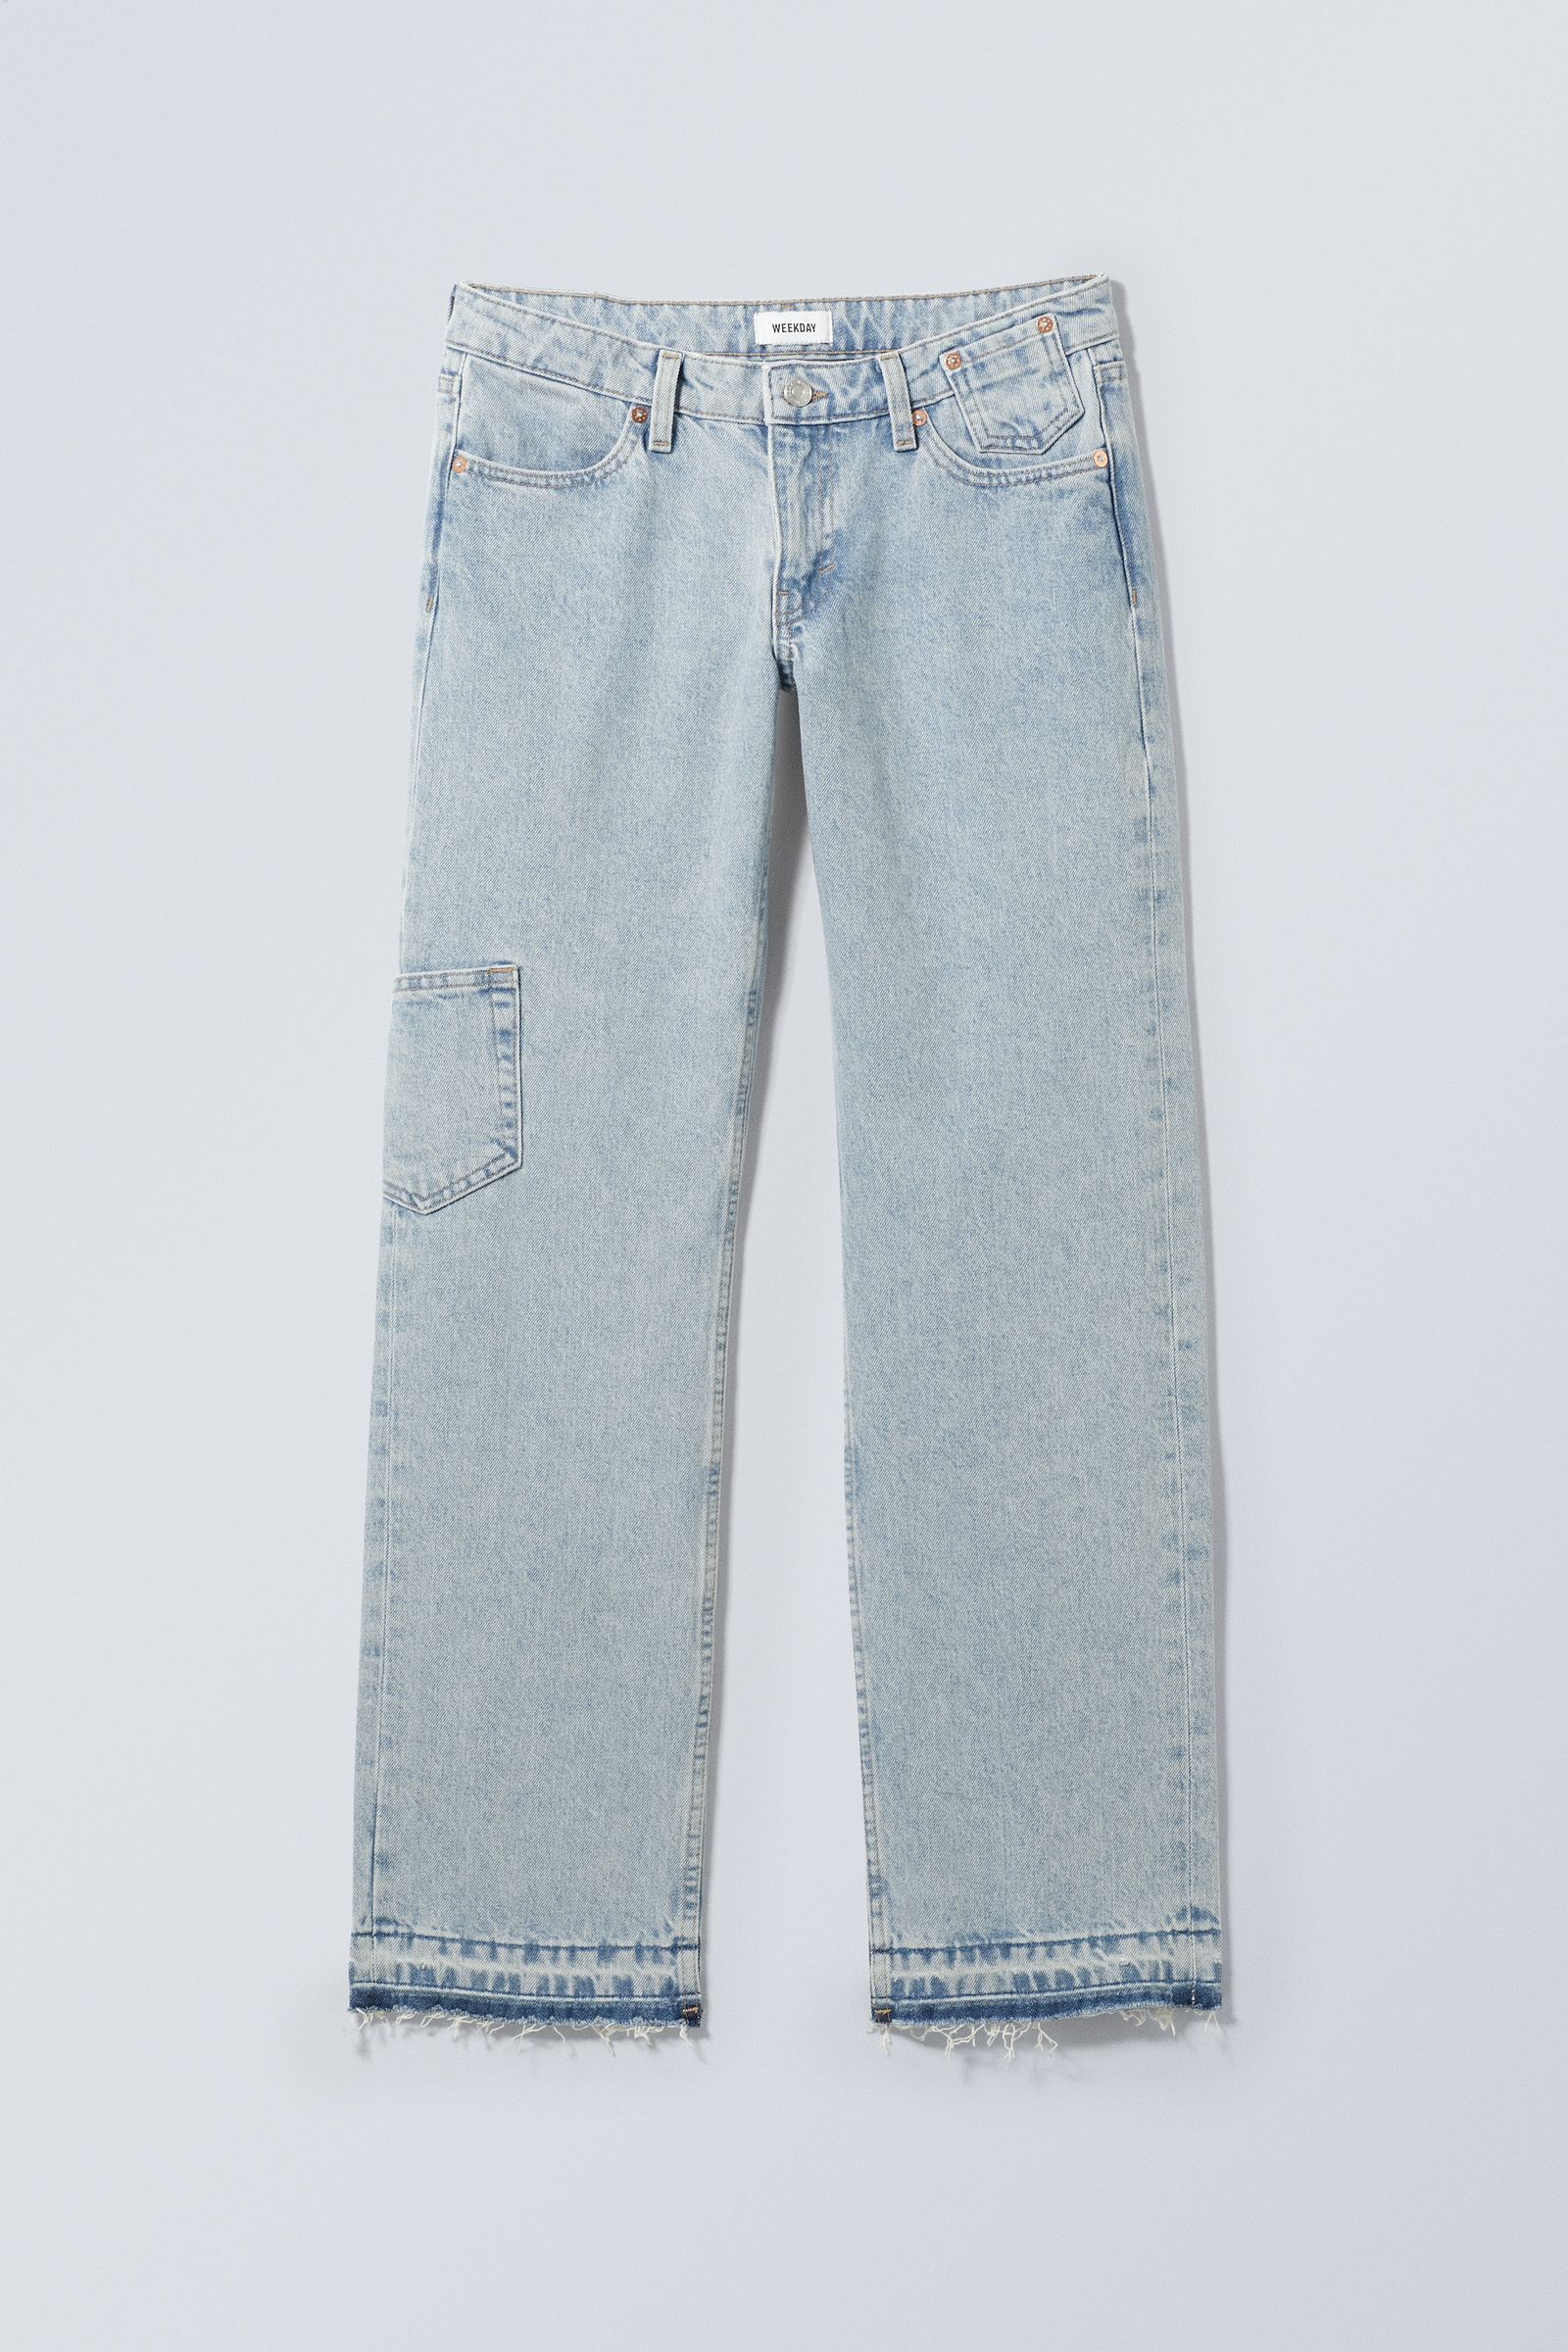 #0000FF - Modulate Deconstructed Jeans - 1